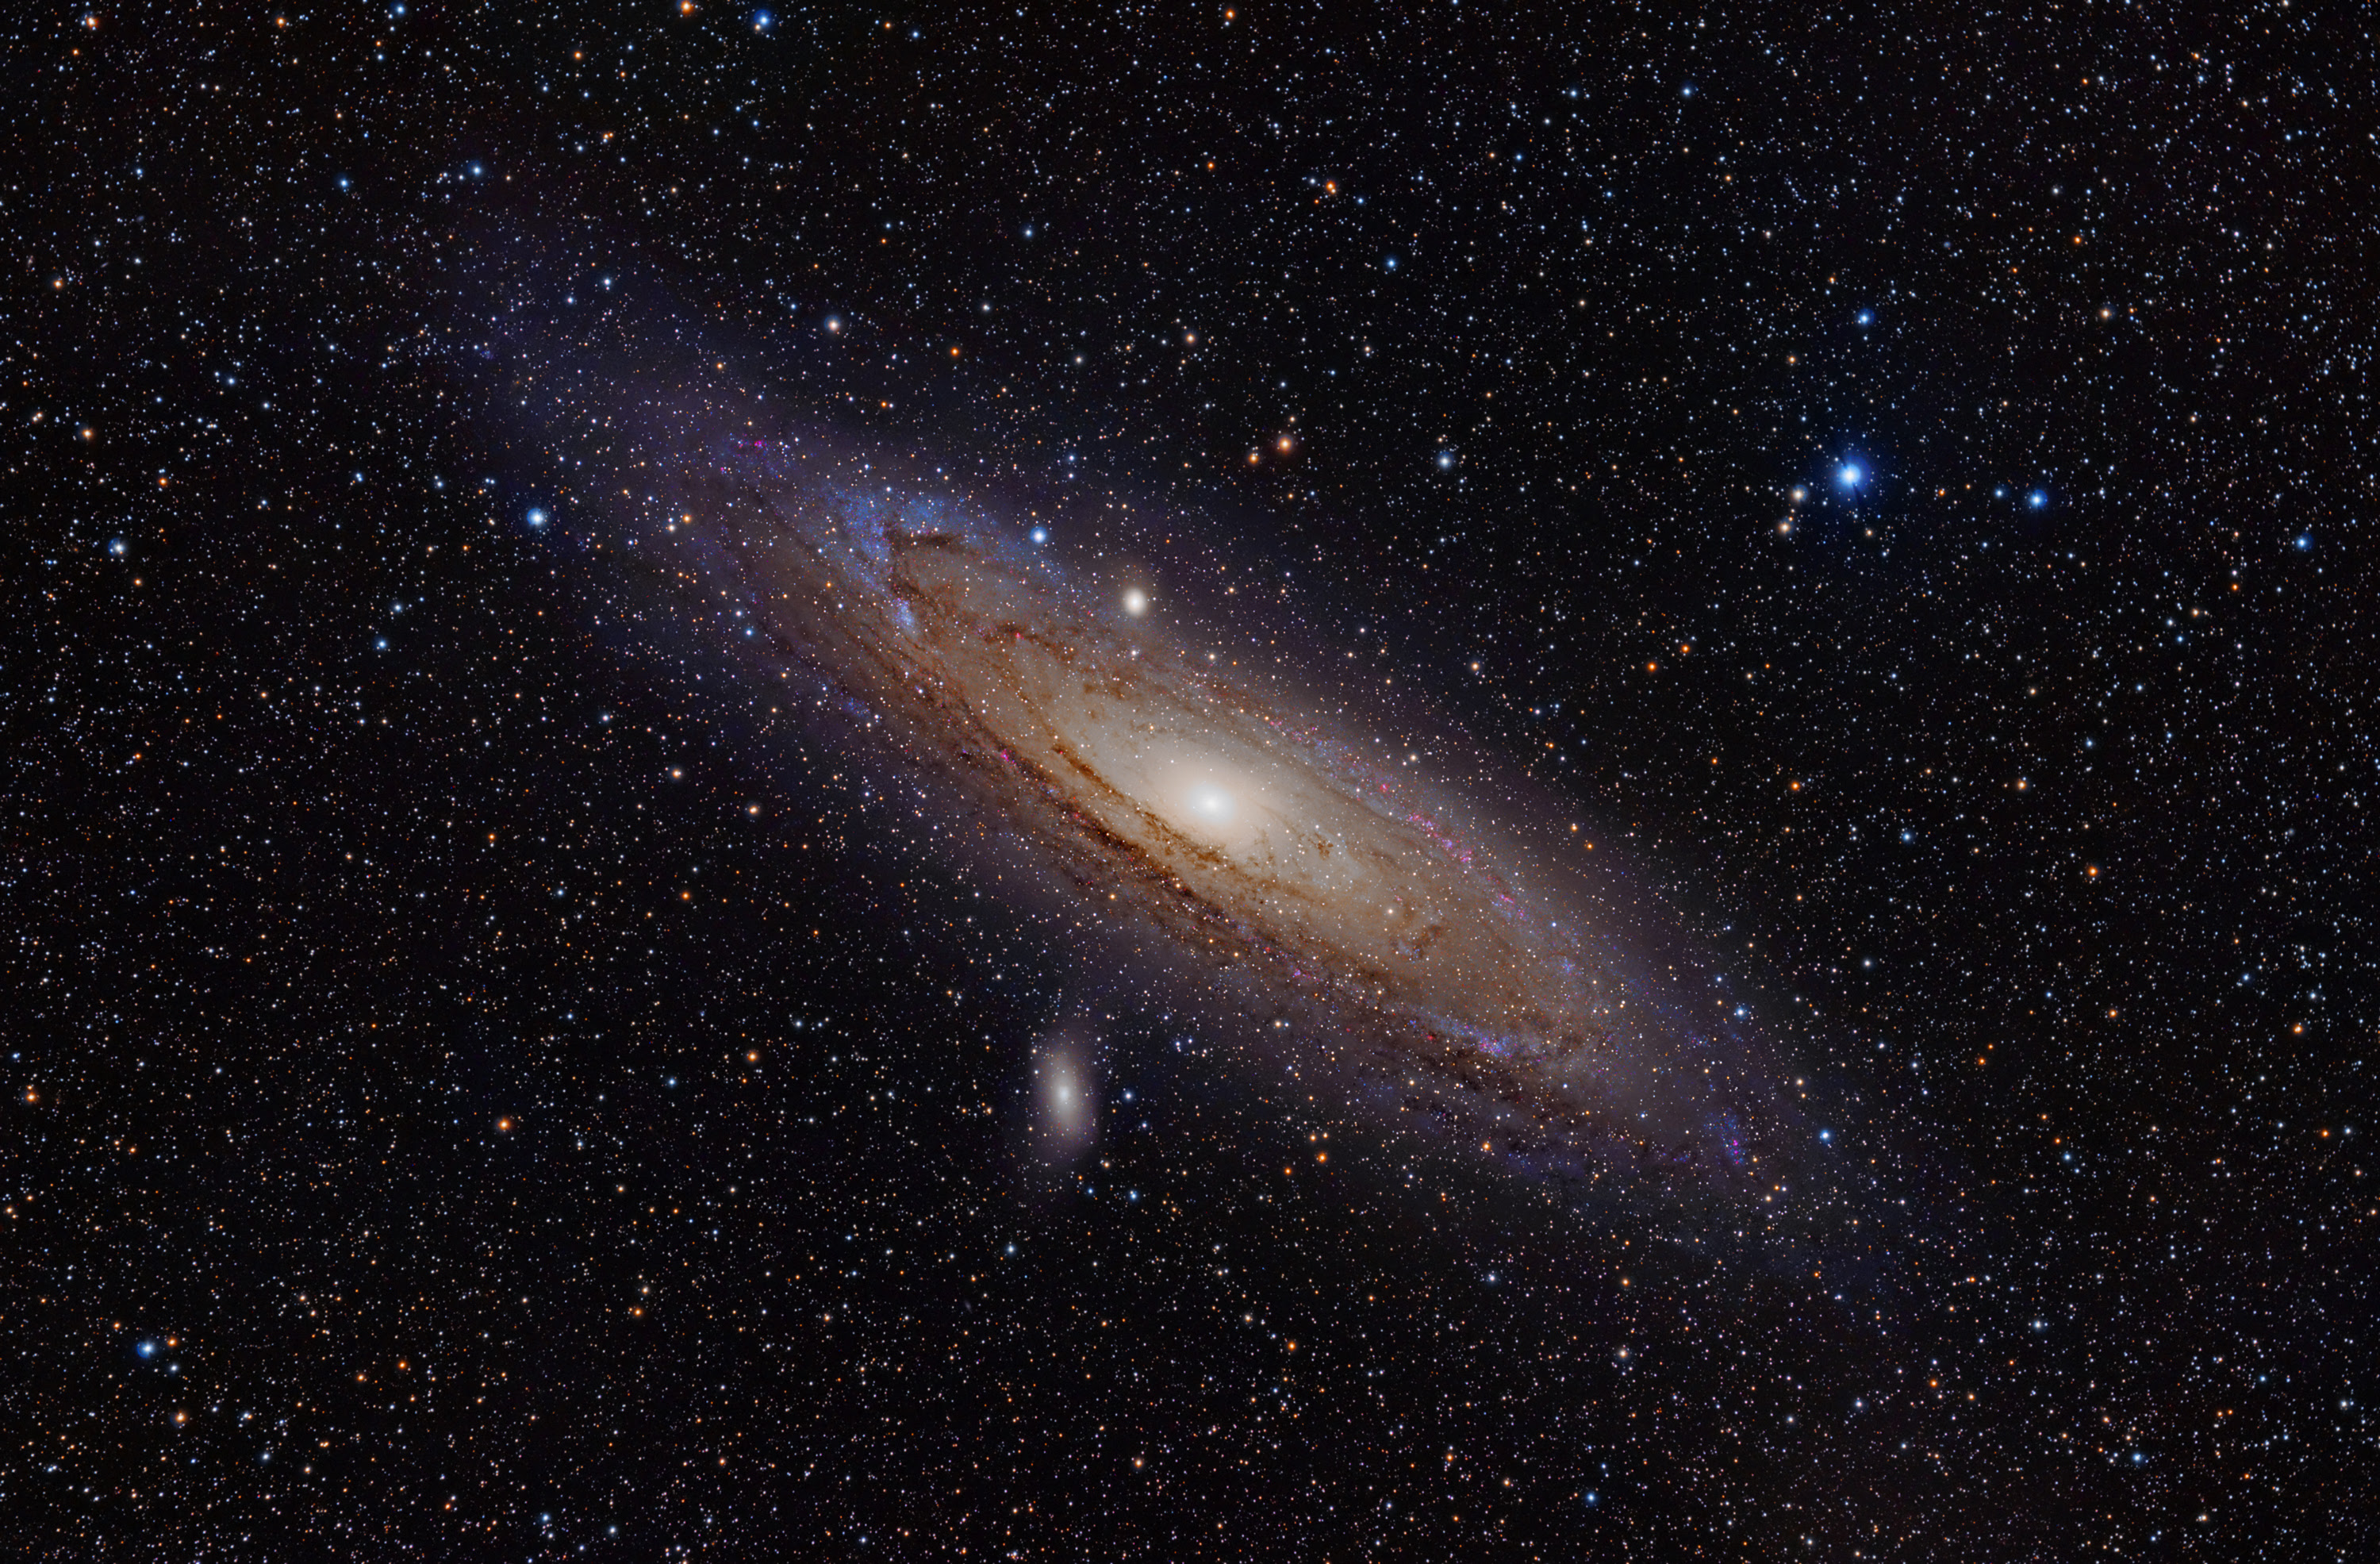 http://upload.wikimedia.org/wikipedia/commons/9/98/Andromeda_Galaxy_%28with_h-alpha%29.jpg